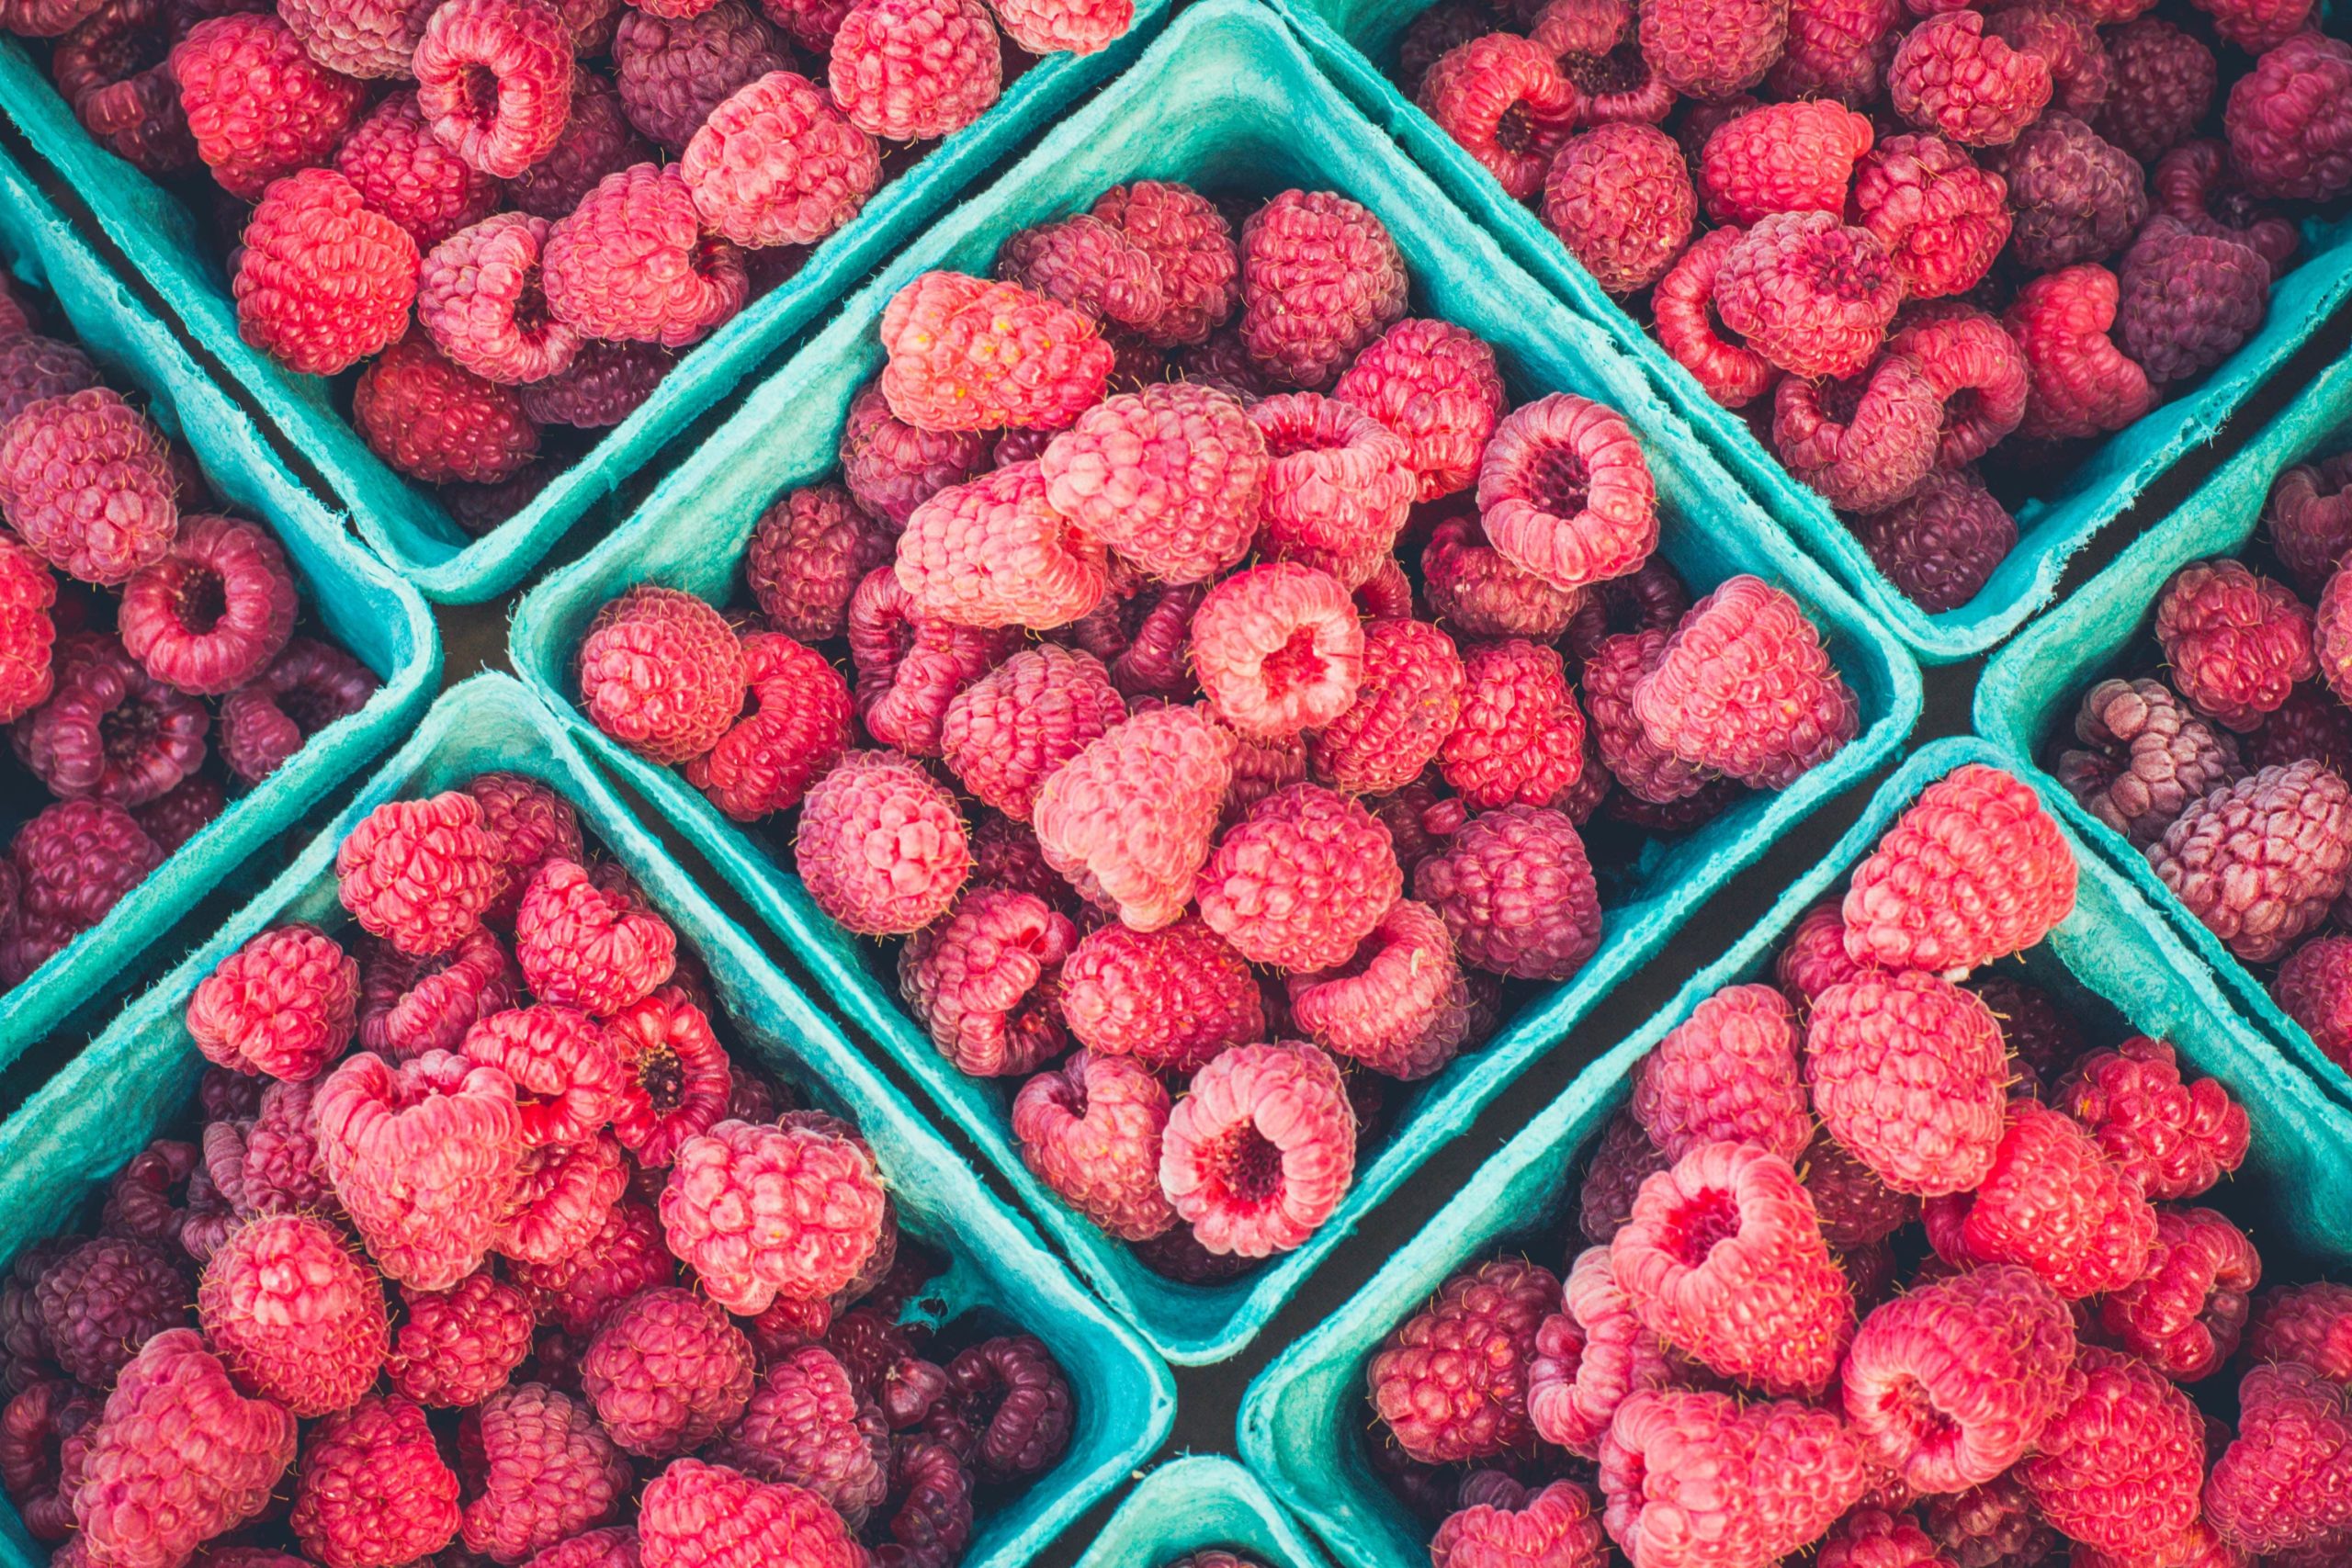 fresh raspberries arranged in square turquoise containers